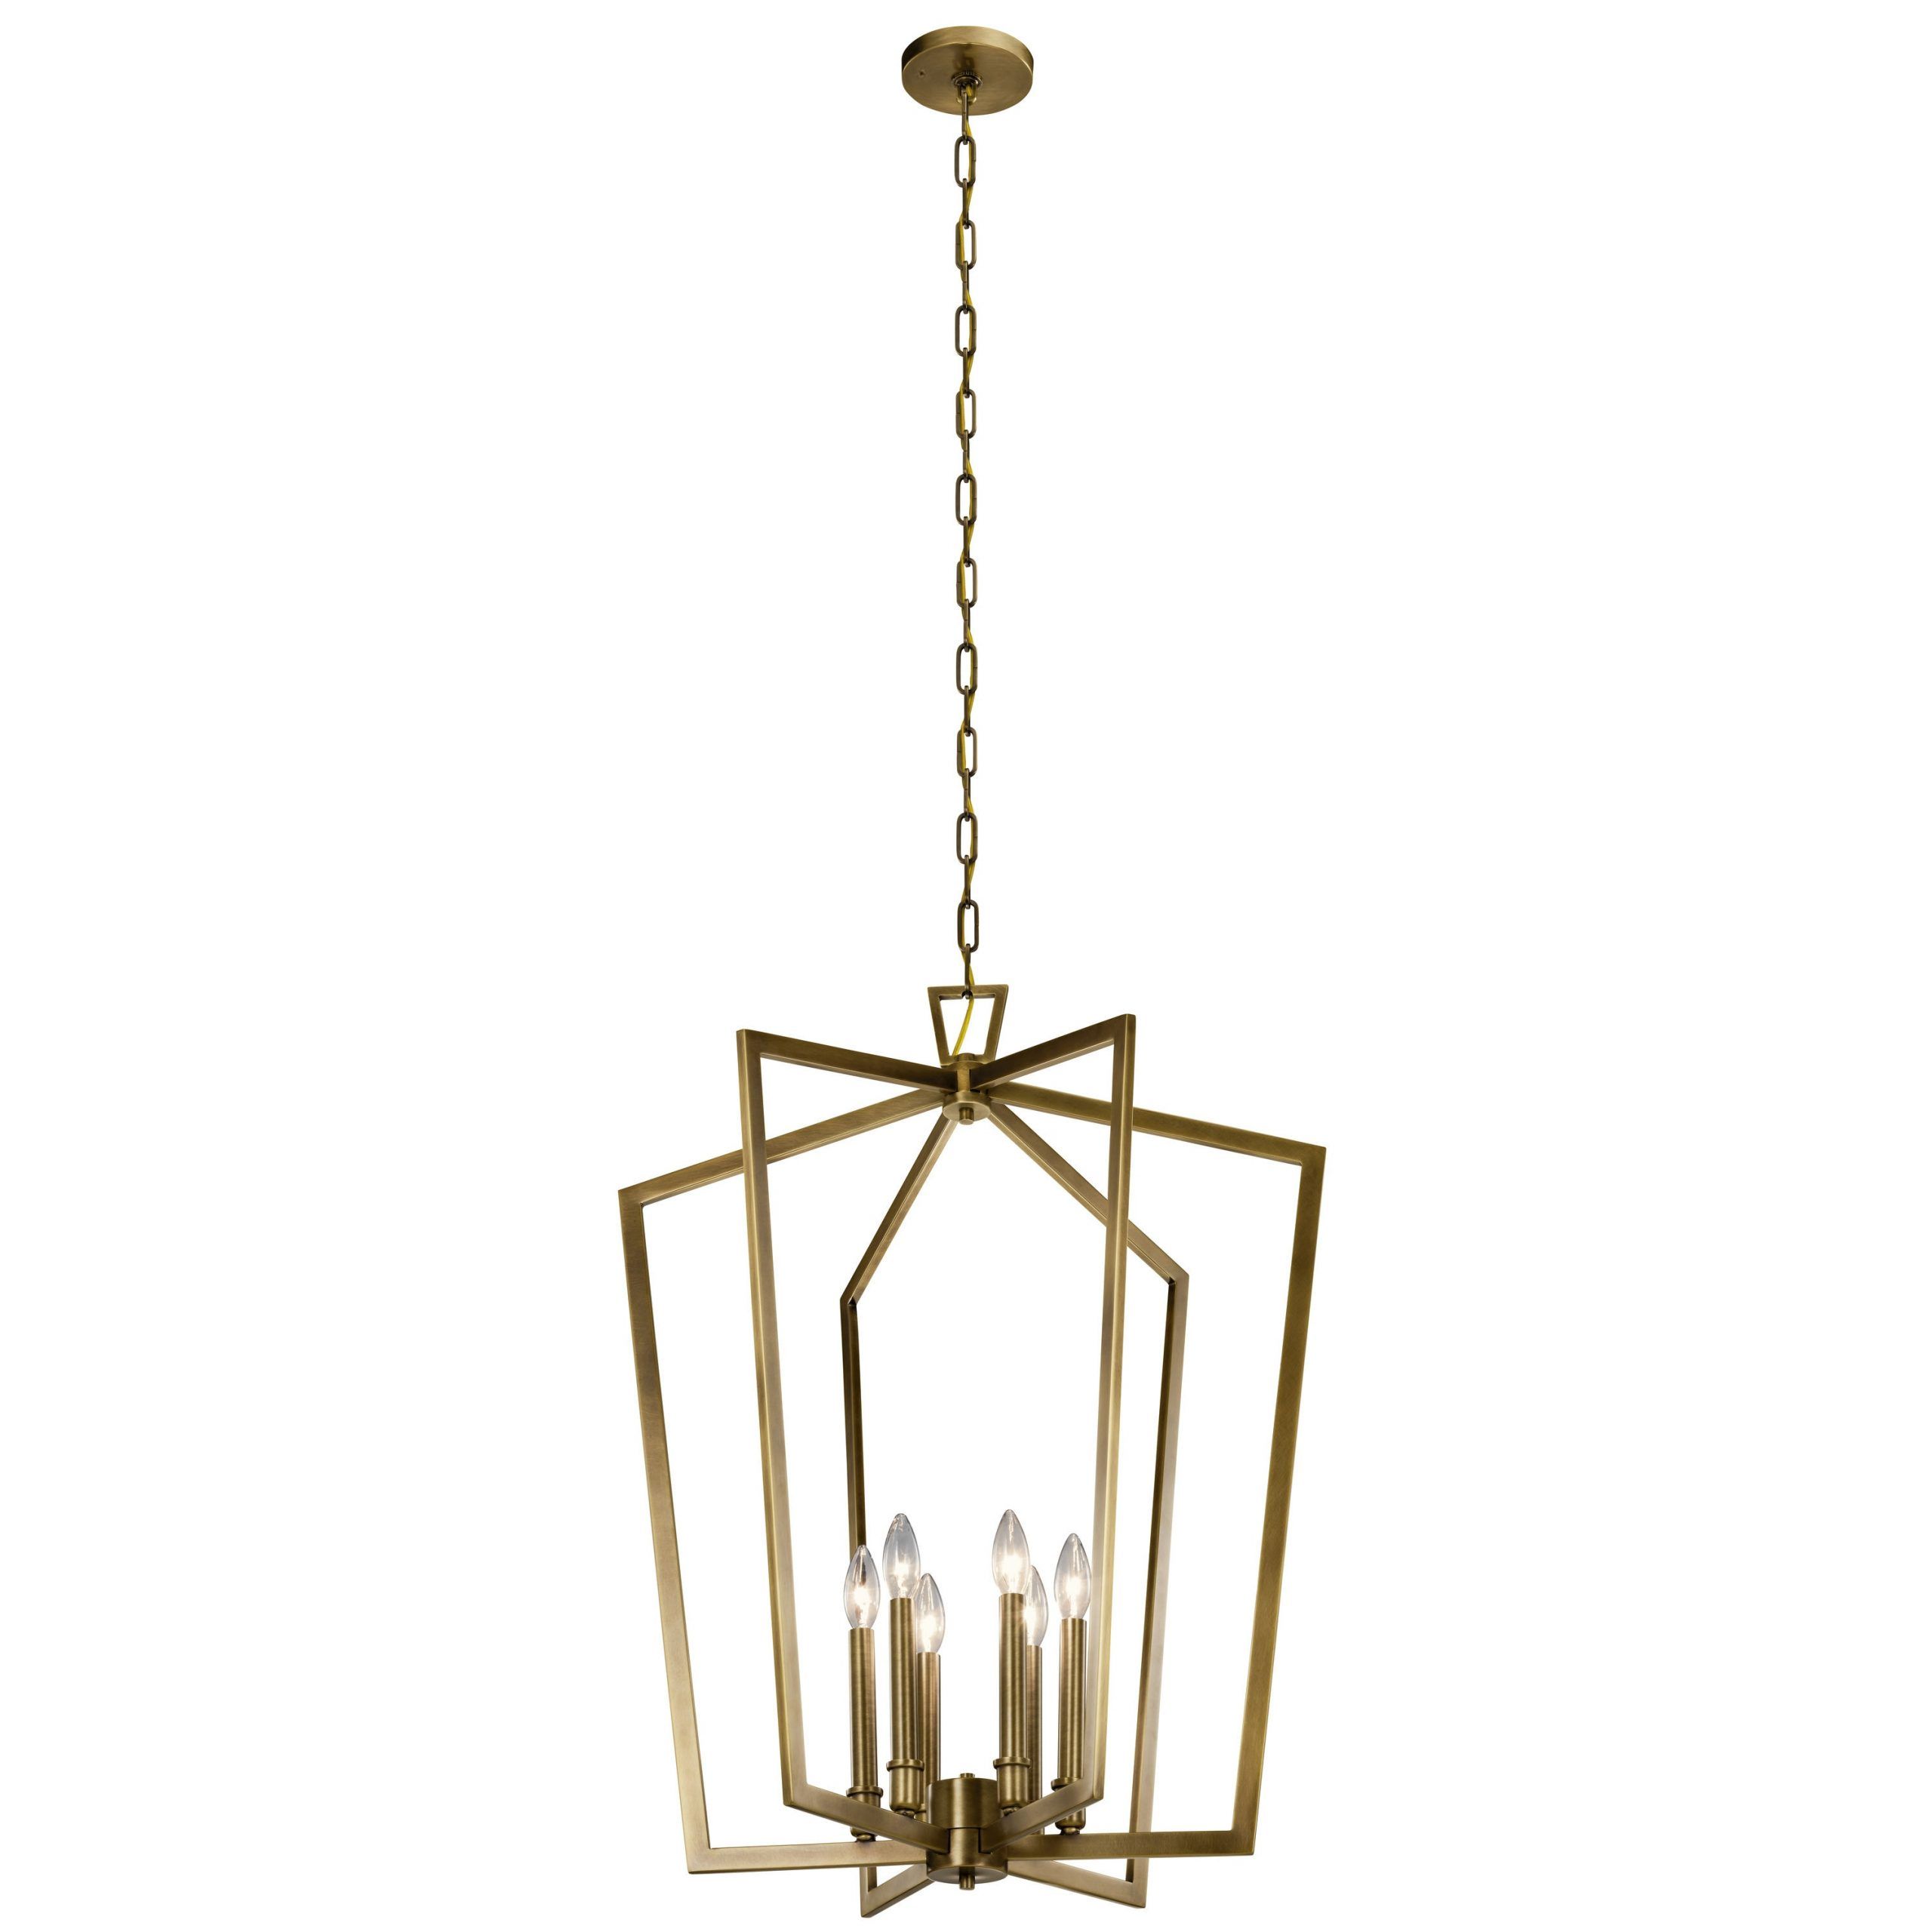 2019 Kichler Abbotswell 6 Light Natural Brass Traditional Lantern Pendant Light  In The Pendant Lighting Department At Lowes With Regard To Natural Brass Lantern Chandeliers (View 6 of 15)